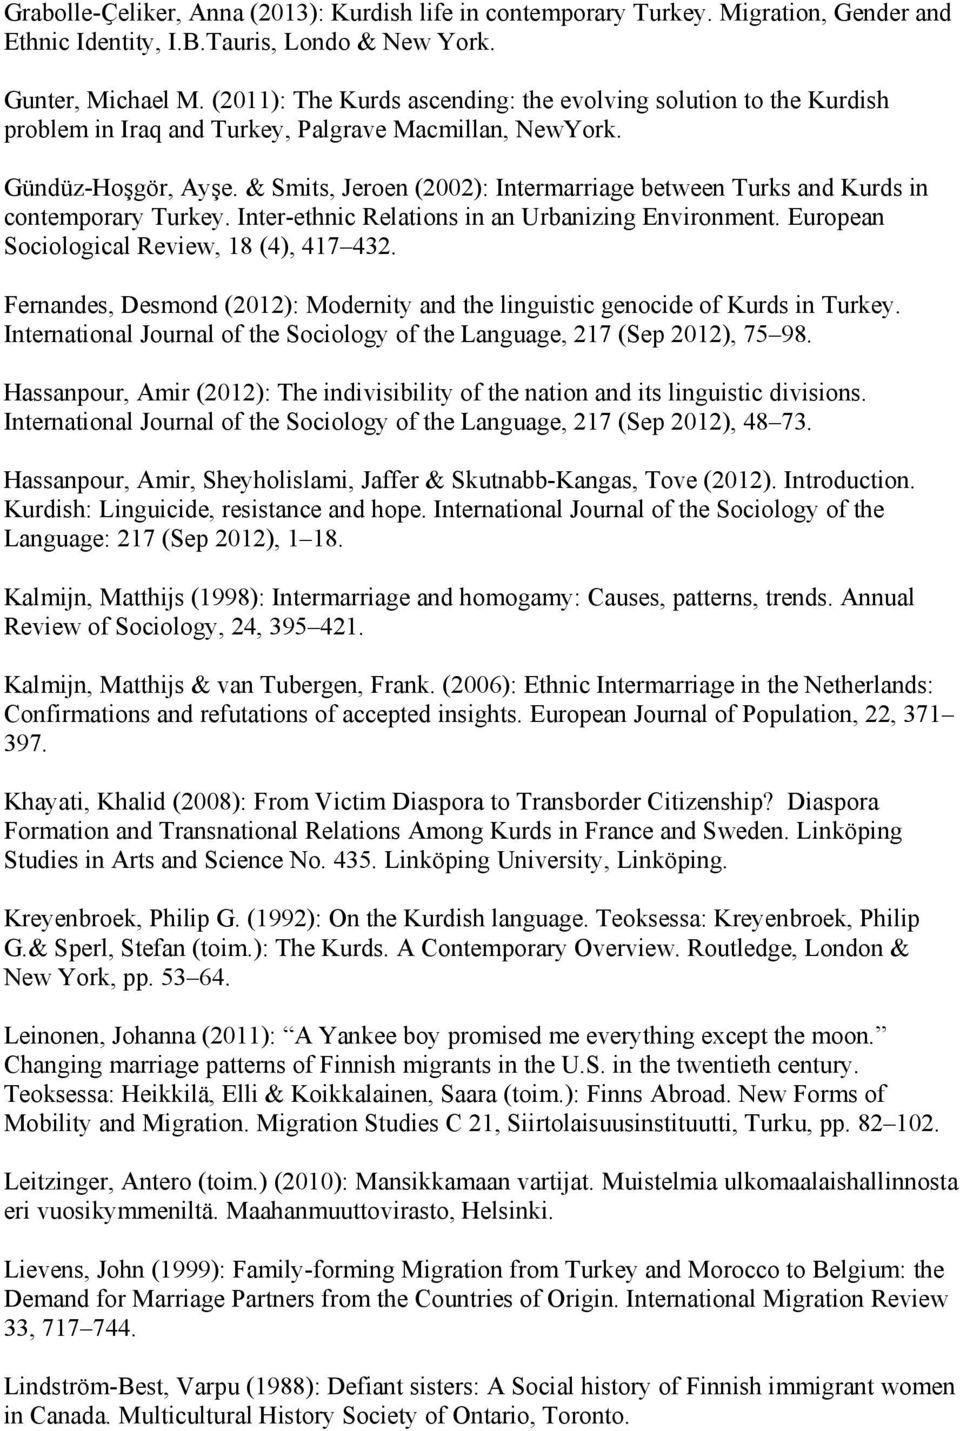 & Smits, Jeroen (2002): Intermarriage between Turks and Kurds in contemporary Turkey. Inter-ethnic Relations in an Urbanizing Environment. European Sociological Review, 18 (4), 417 432.